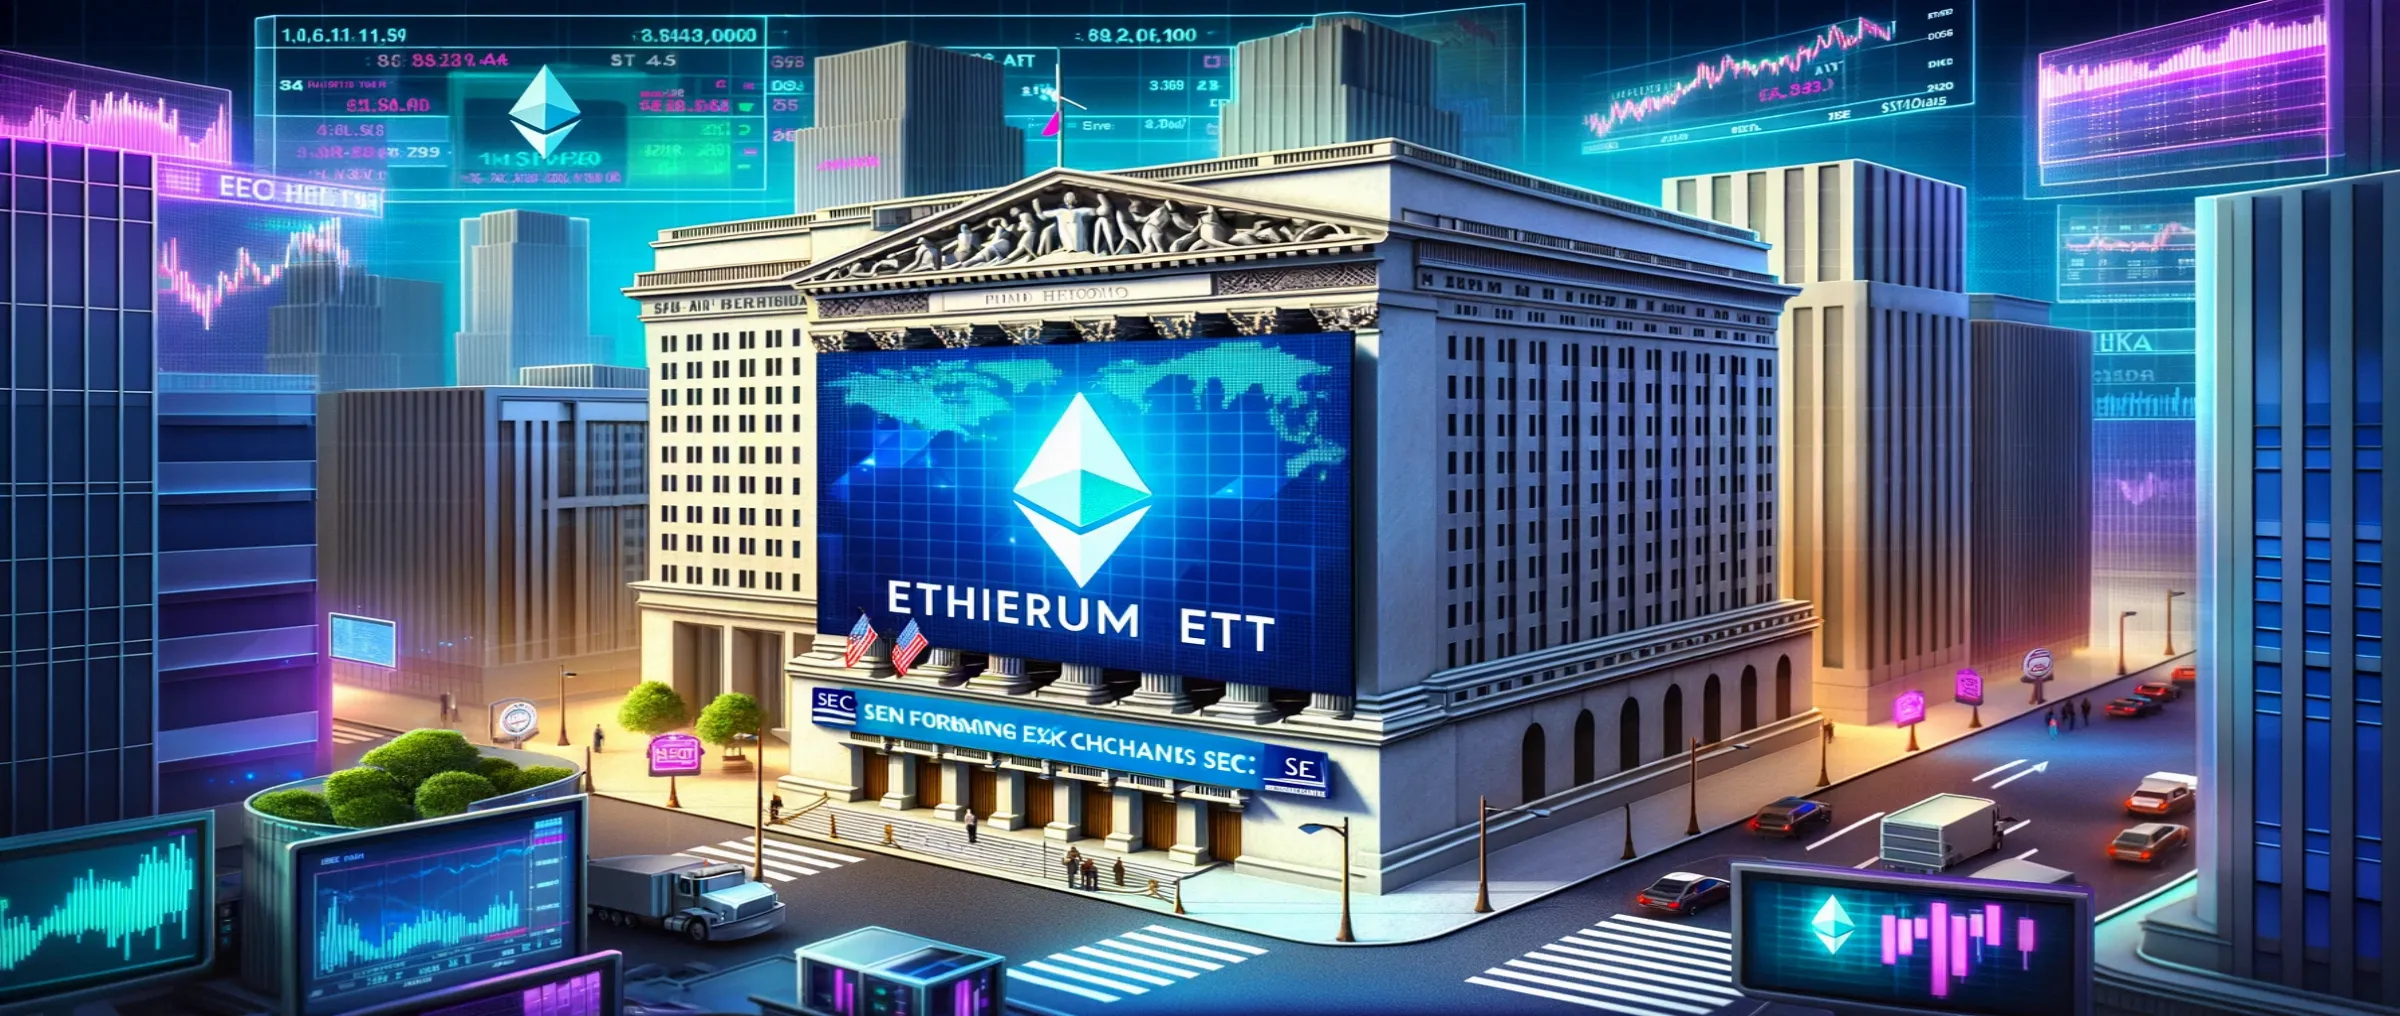 SEC notifies exchanges of potential approval of Ethereum ETF, Barrons reports